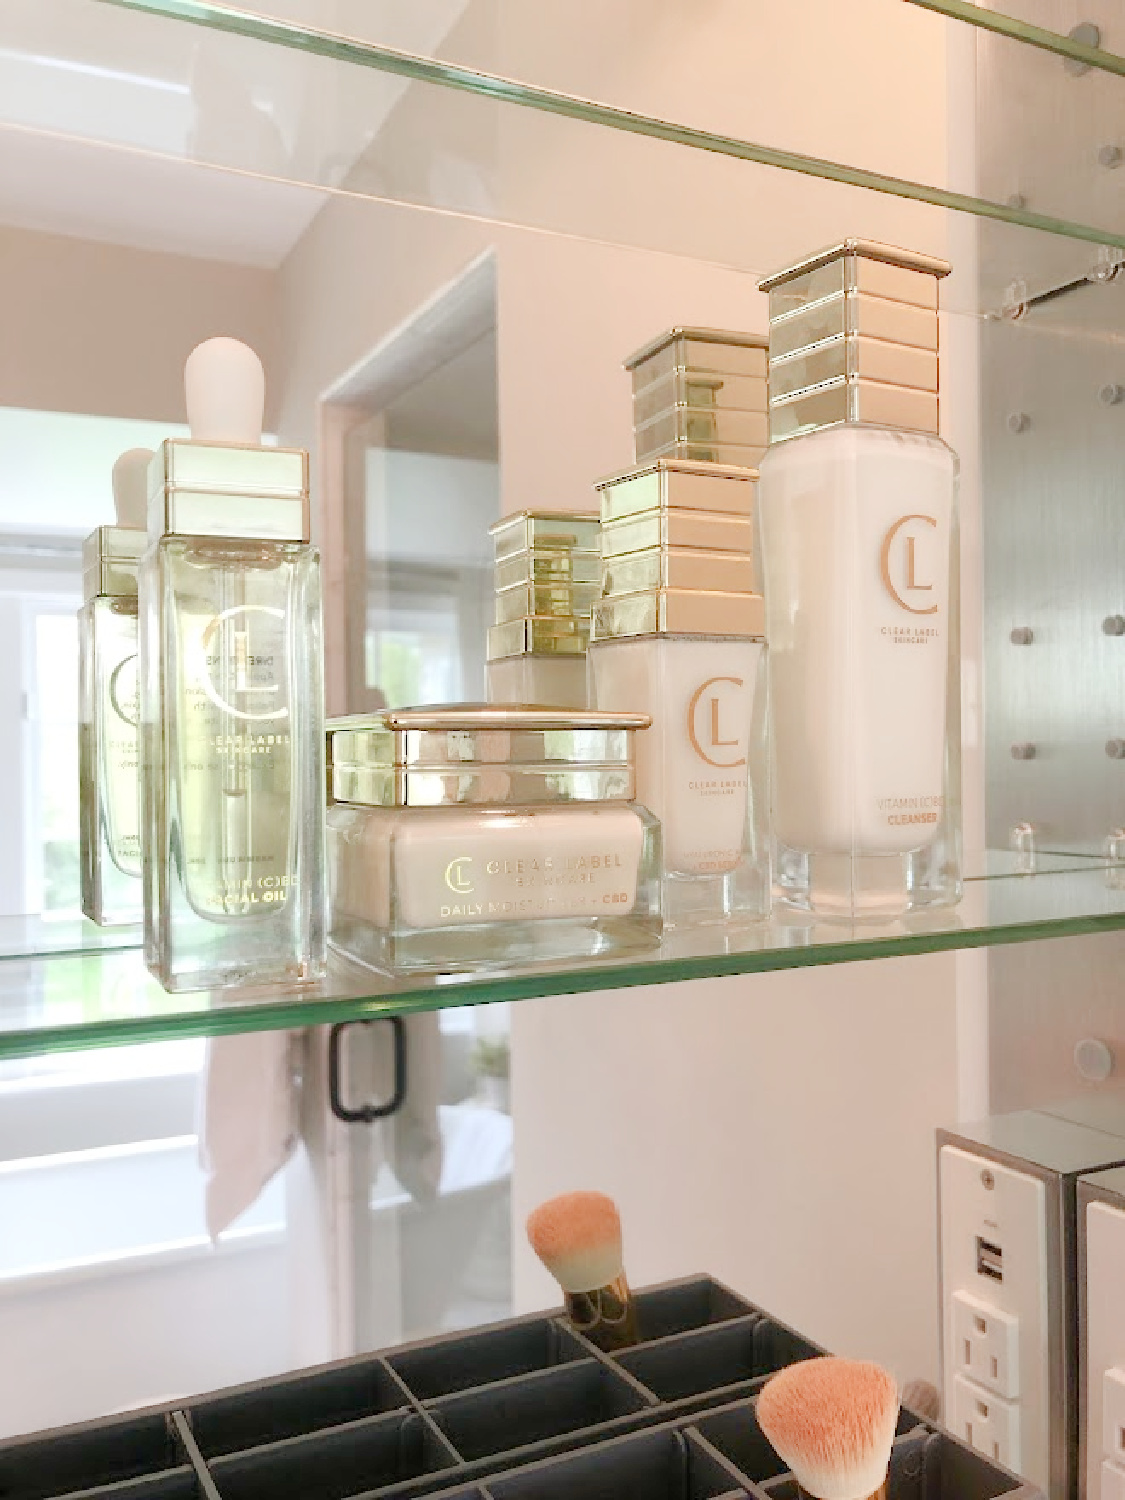 Clear Label Skincare essentials in my medicine cabinet - Hello Lovely Studio. #cleanskincare #clearlabelskincare